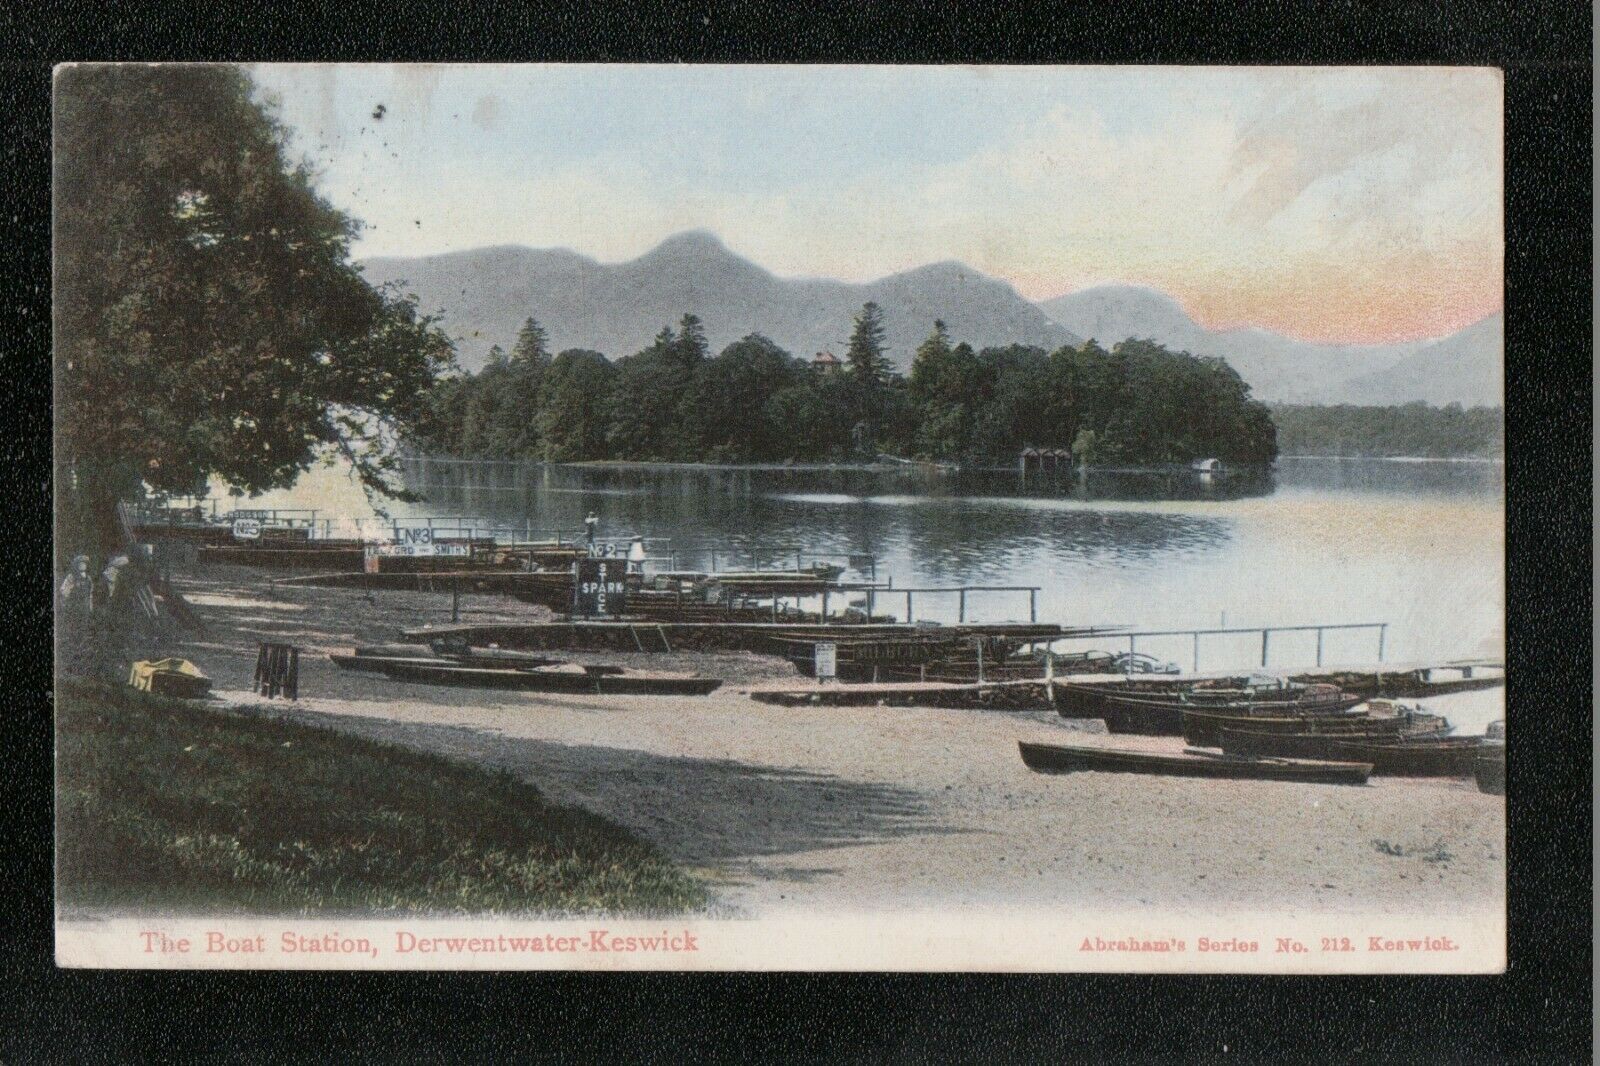 House Clearance - The Boat Station Derwentwater Keswick 1907 Abraham's Series Service